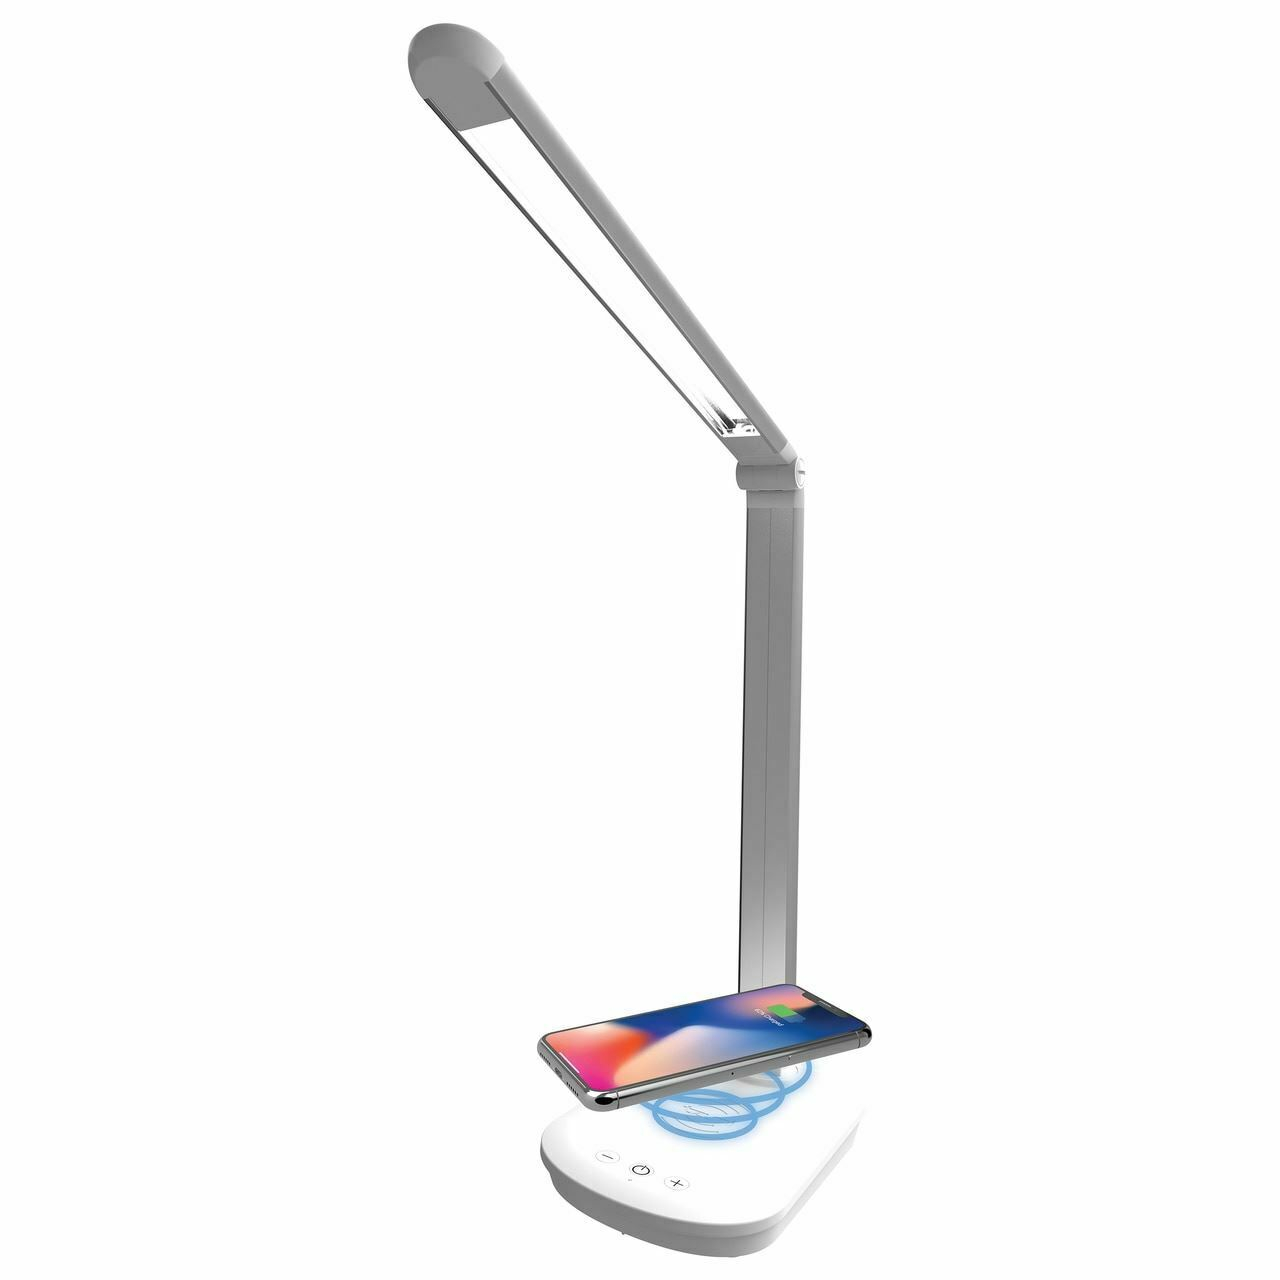 Tzumi Wireless Charging Led Desk Light Lamp Built In Qi within sizing 1280 X 1280